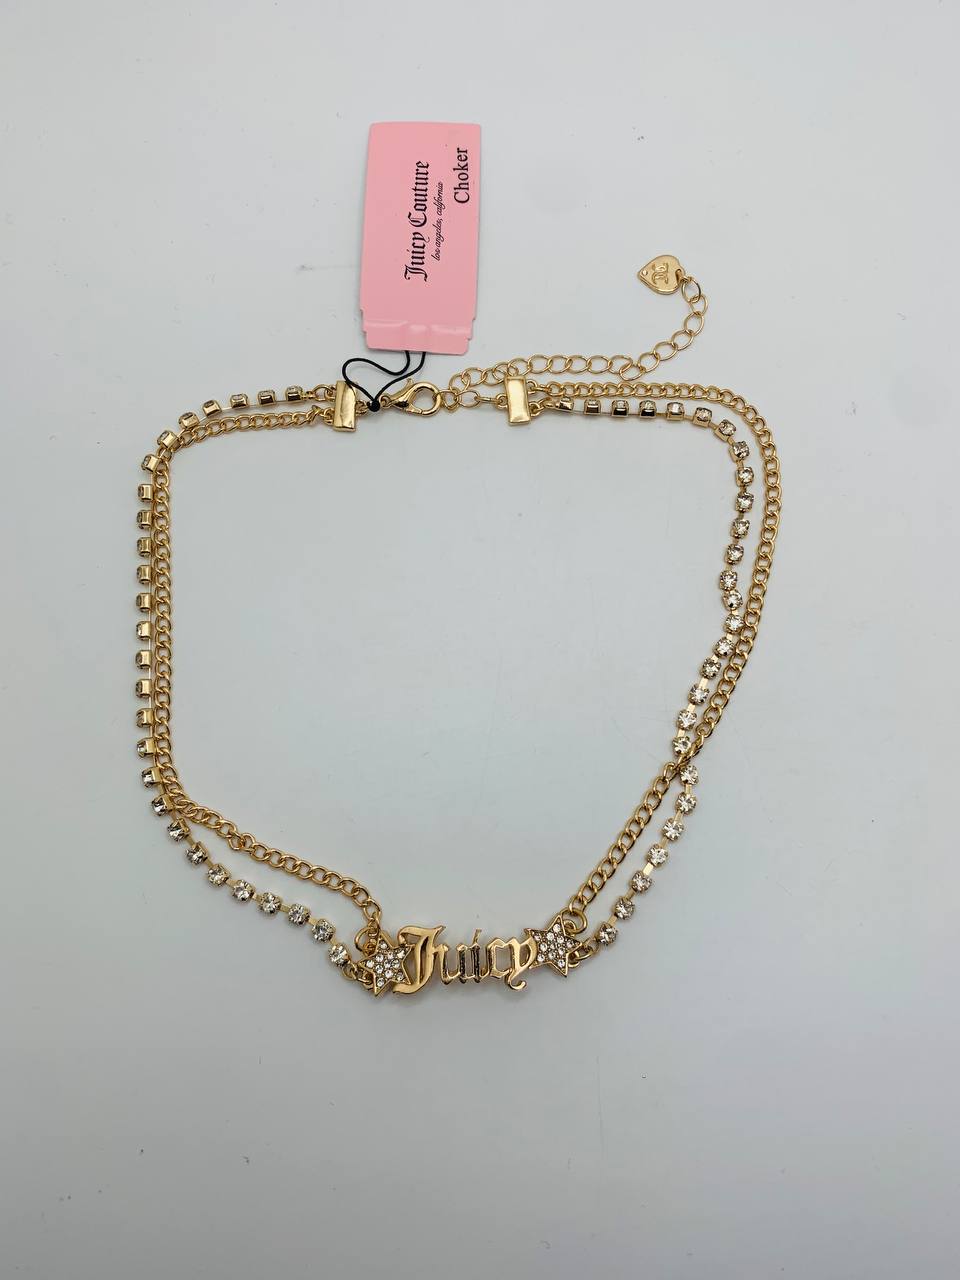 Juicy couture necklace